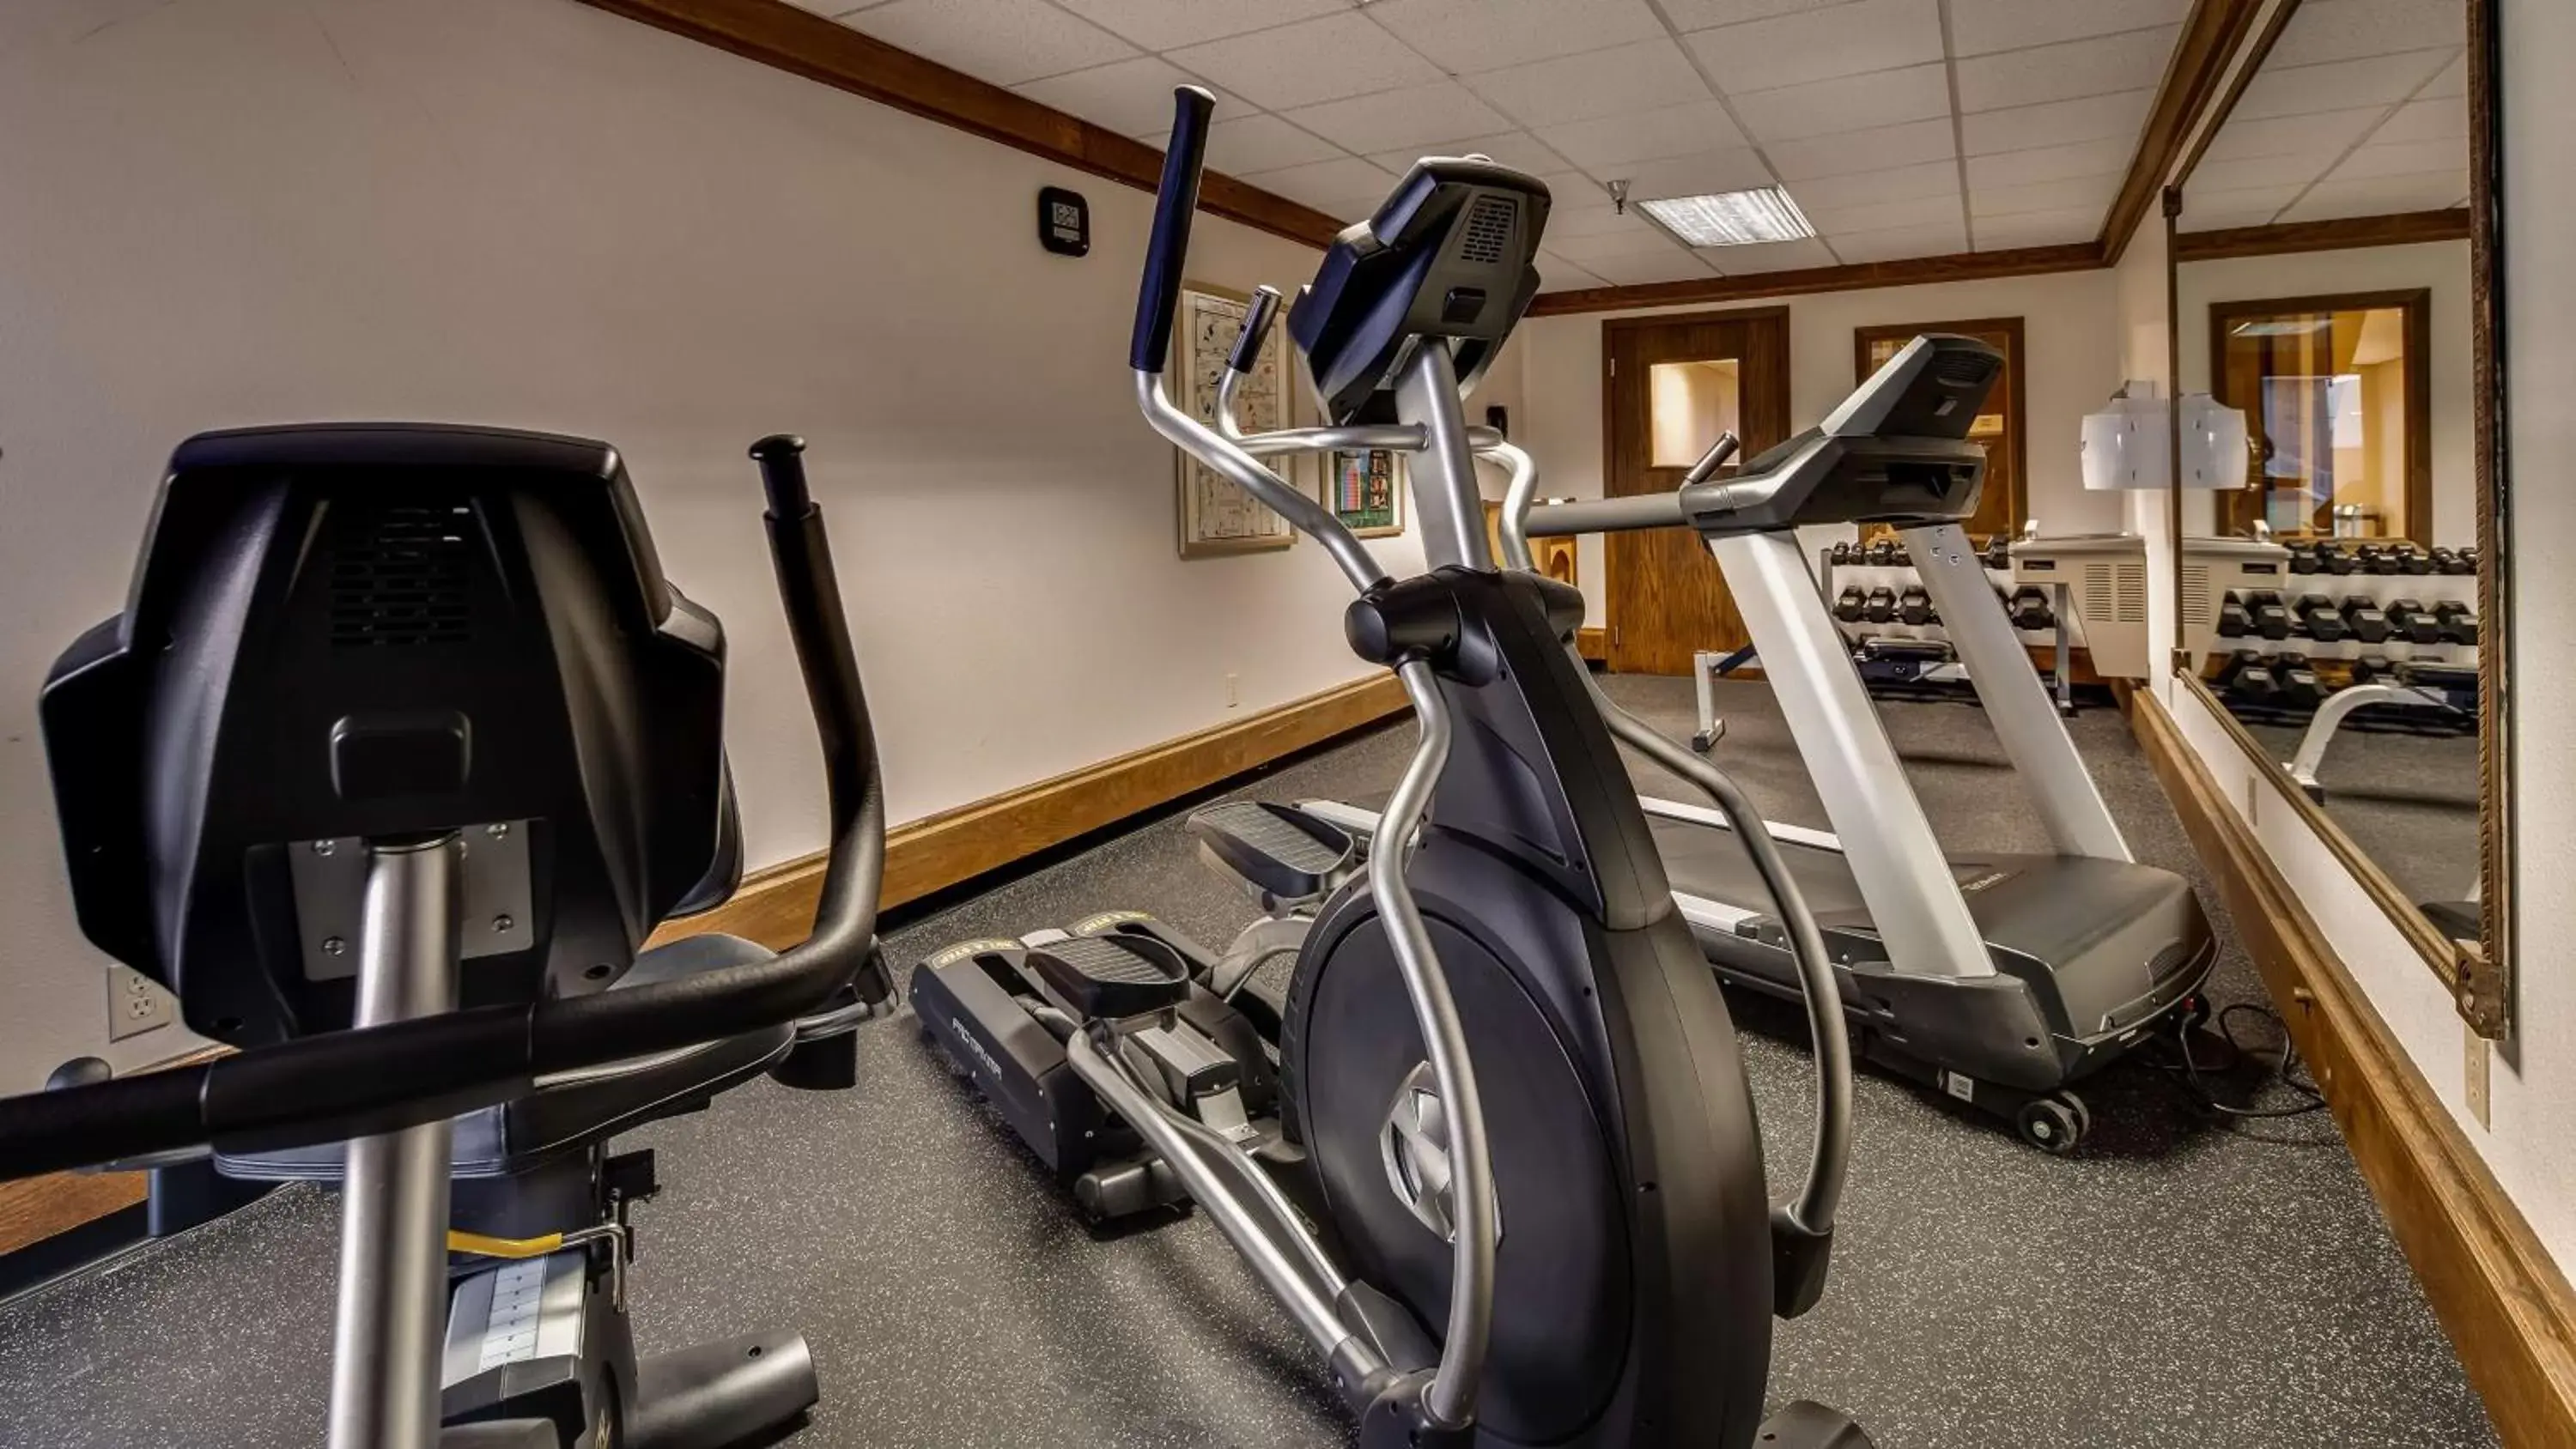 Fitness centre/facilities, Fitness Center/Facilities in Best Western Plus Ahtanum Inn